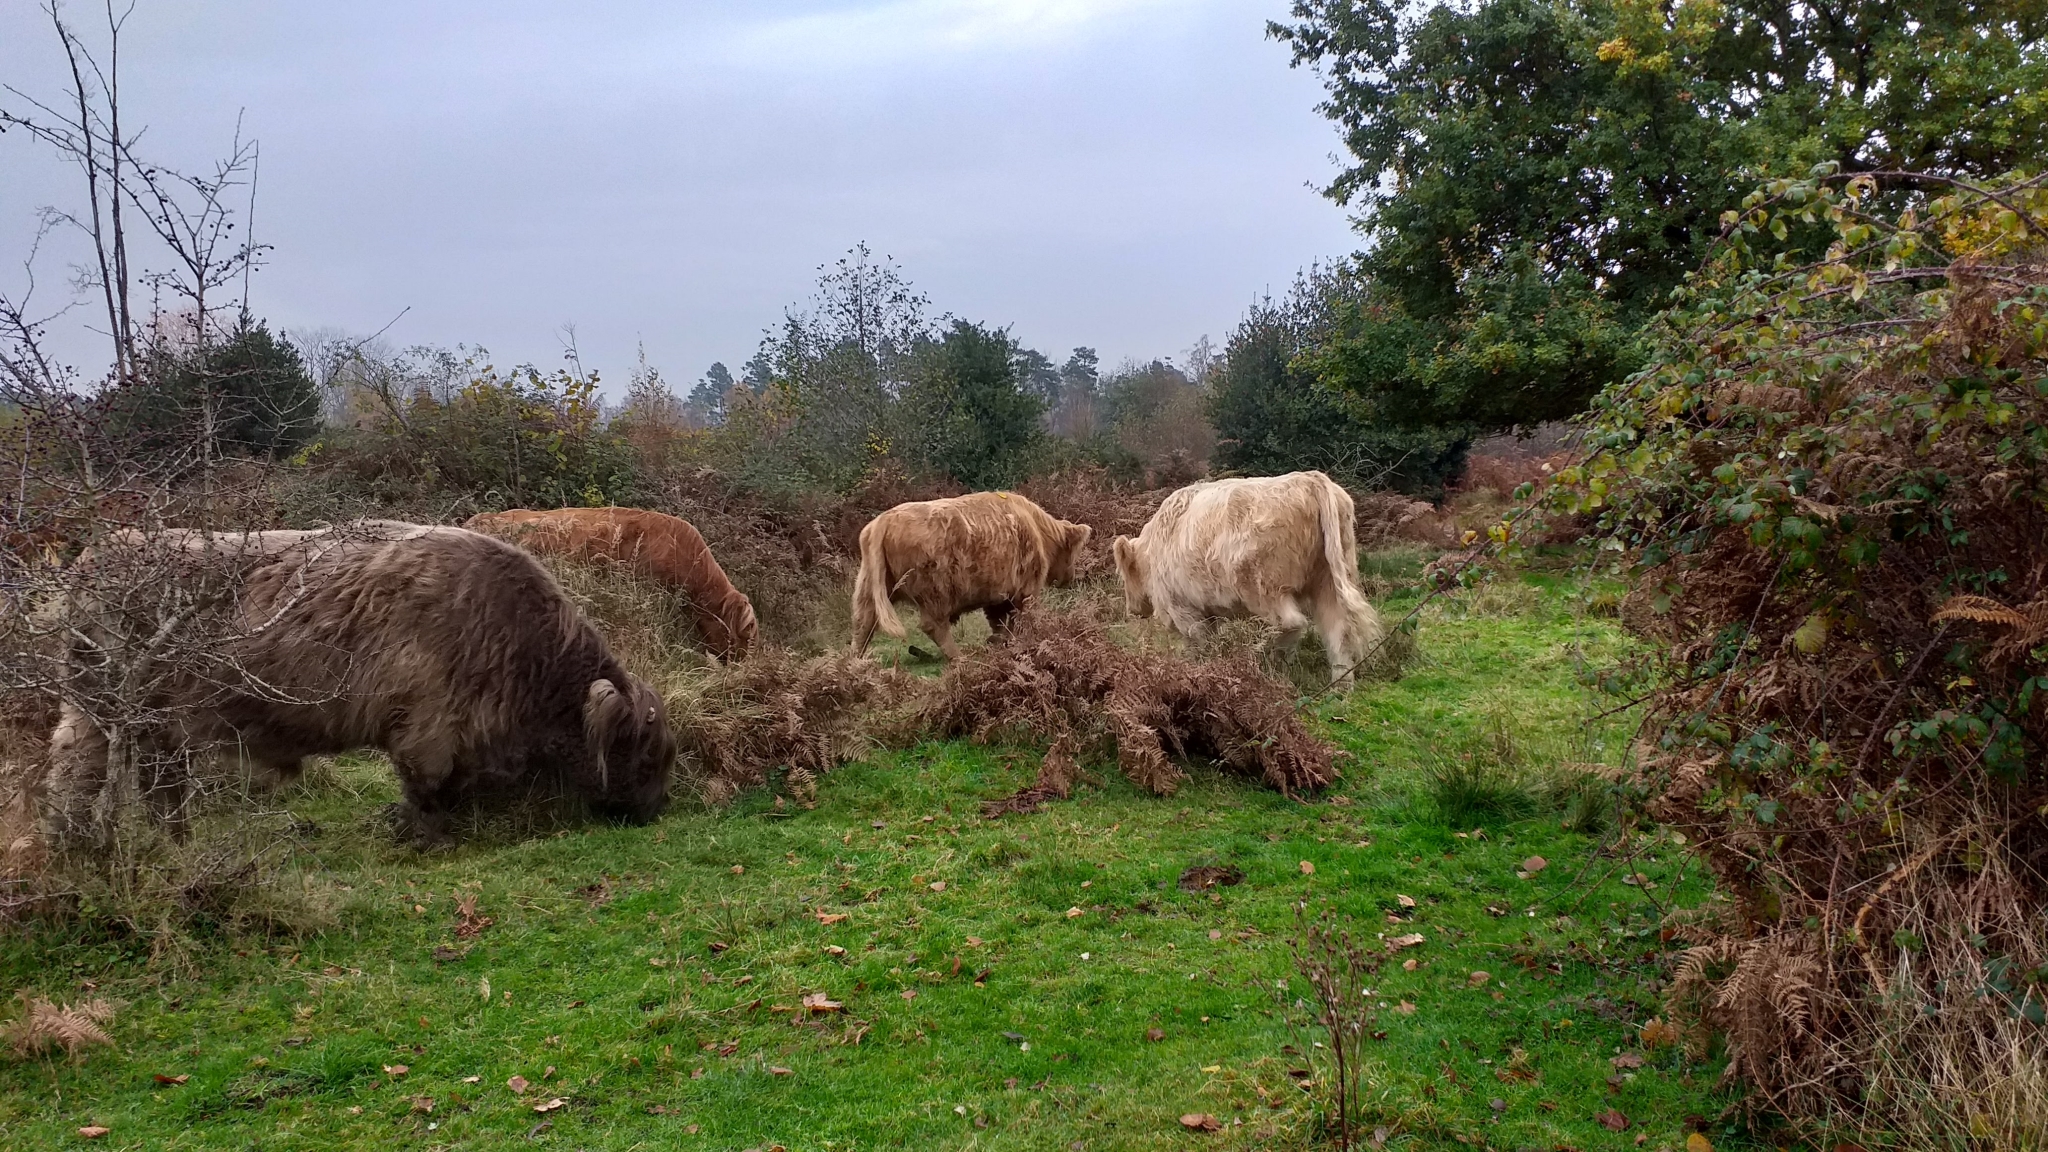 A photo from the FoTF Conservation Event - November 2019 - Gorse Clearance at Hockham Hills & Holes : Even more cows!